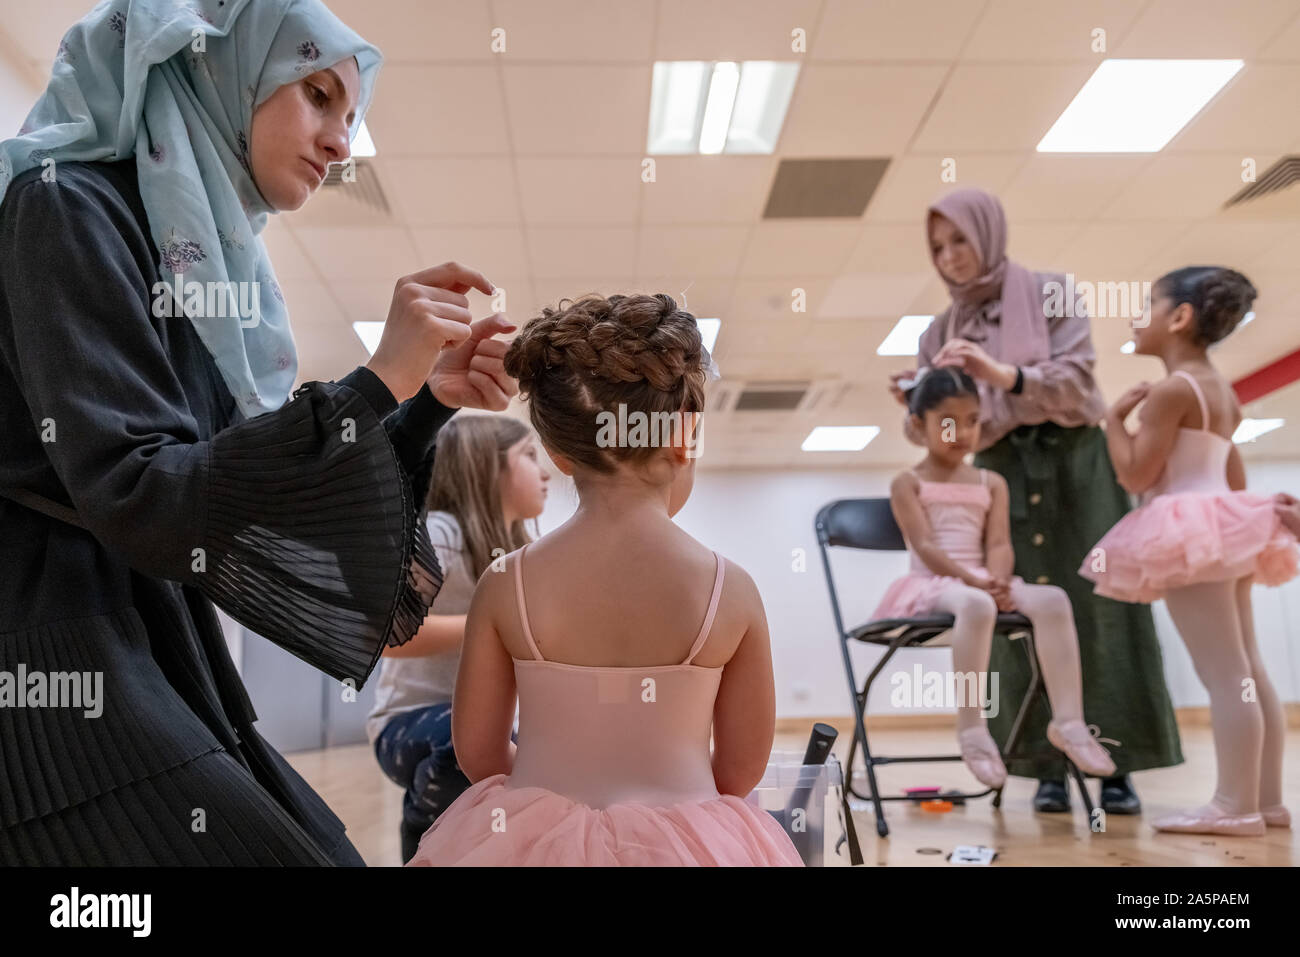 London, UK. 22nd Oct, 2019. World Ballet Day: Muslim Ballet School. Grace & Poise Academy. Founded in Jan 2019 by Maisie Alexandra Byers(pictured, right), a graduate of the Royal Academy of Dance and Dr Sajedah Shabib(pictured, left), business director, Grace & Poise Academy is the world’s first ballet school bringing ballet to the Muslim community.  Young dancers pictured no order: Marym 4yrs, Halimah 4yrs and Evi 5yrs. Credit: Guy Corbishley/Alamy Live News Stock Photo